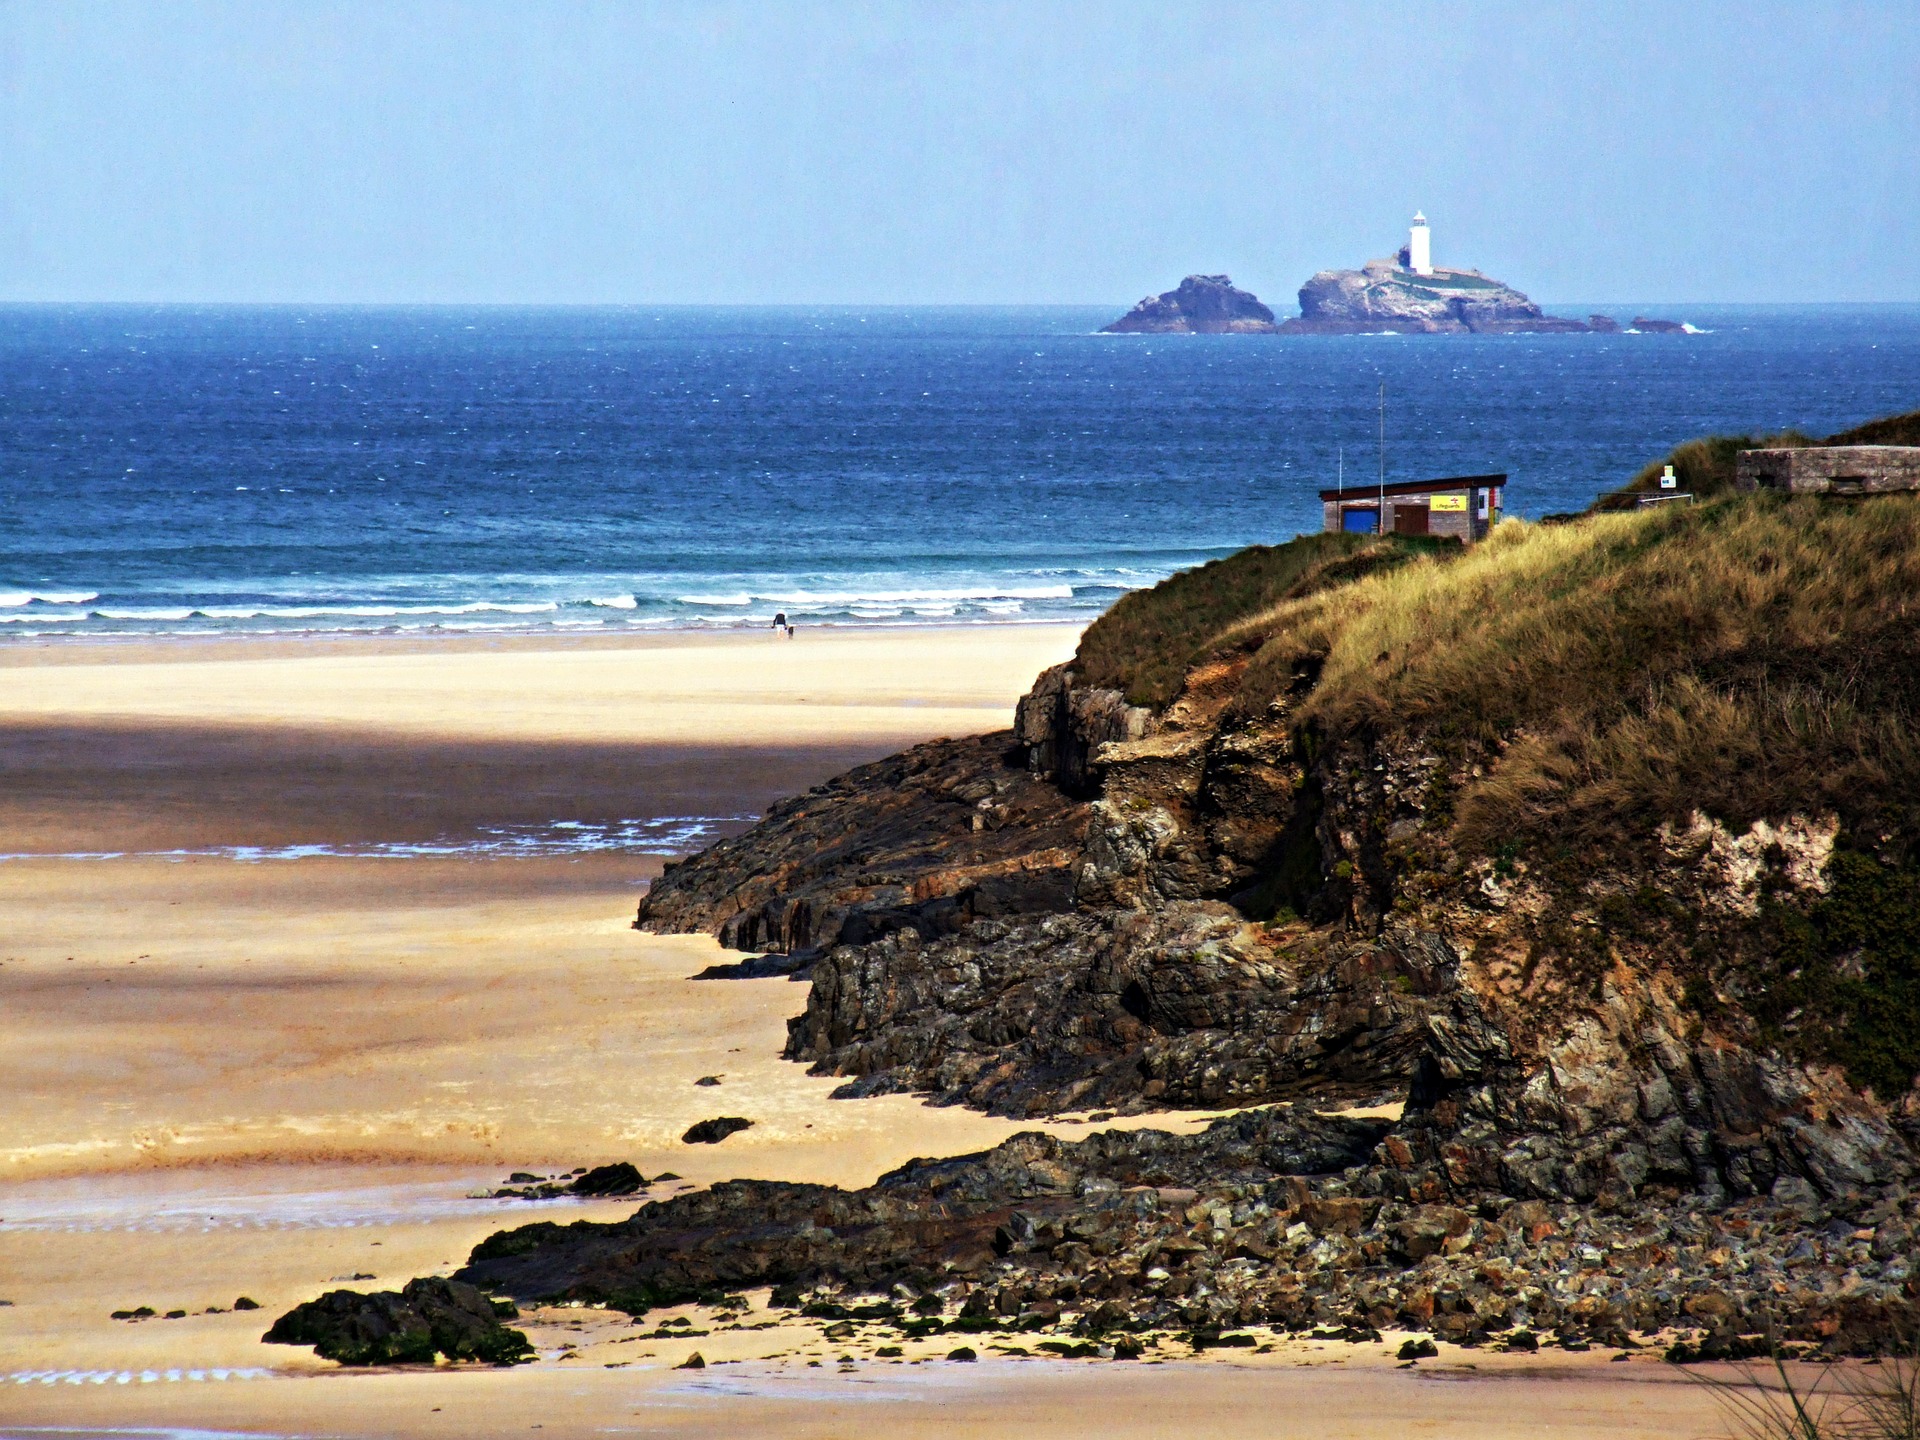 Get Yourself Out There - Ten Best Remote British Beaches